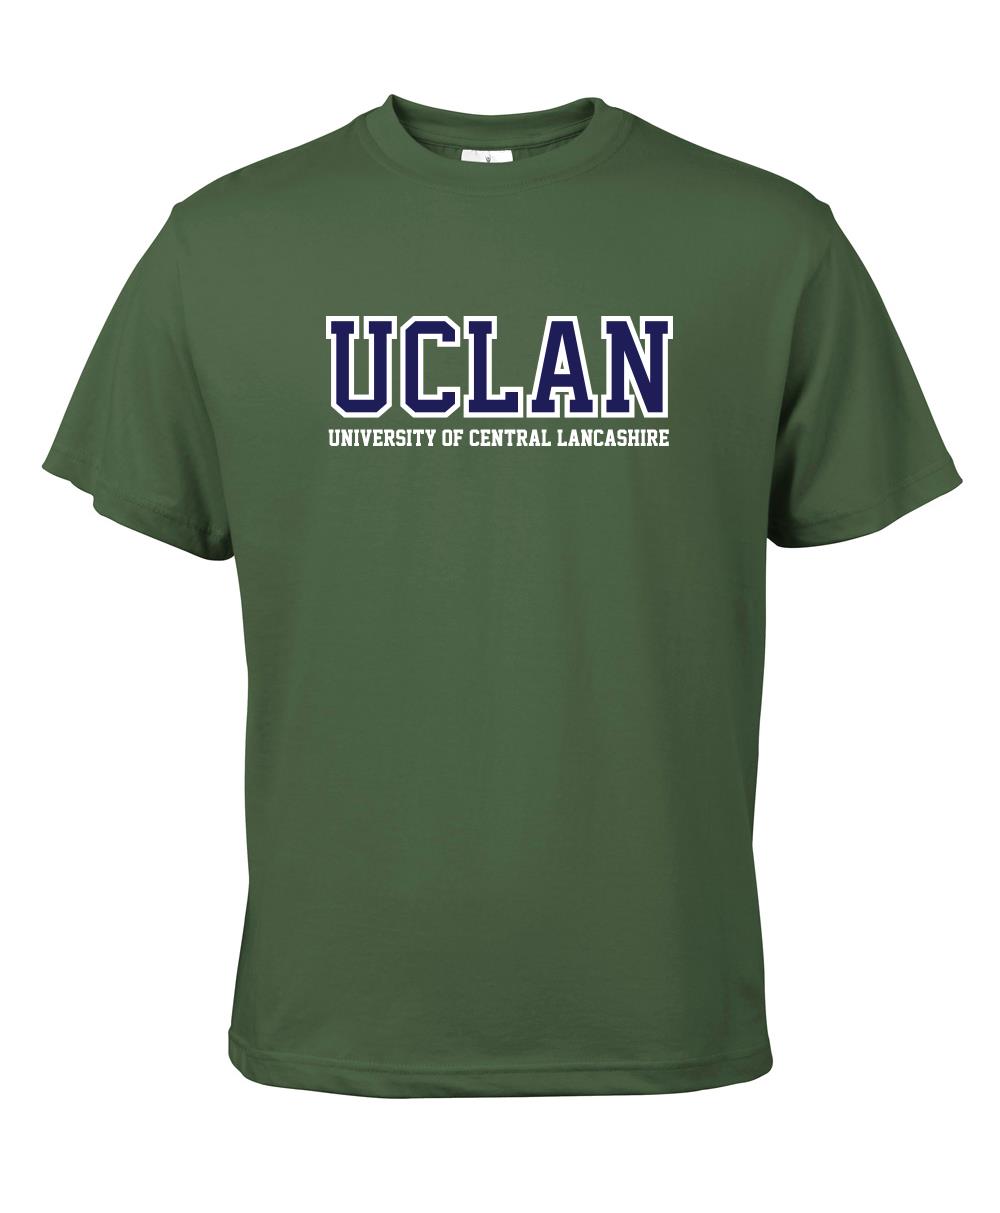 Another Green UCLan Logo Tshirt